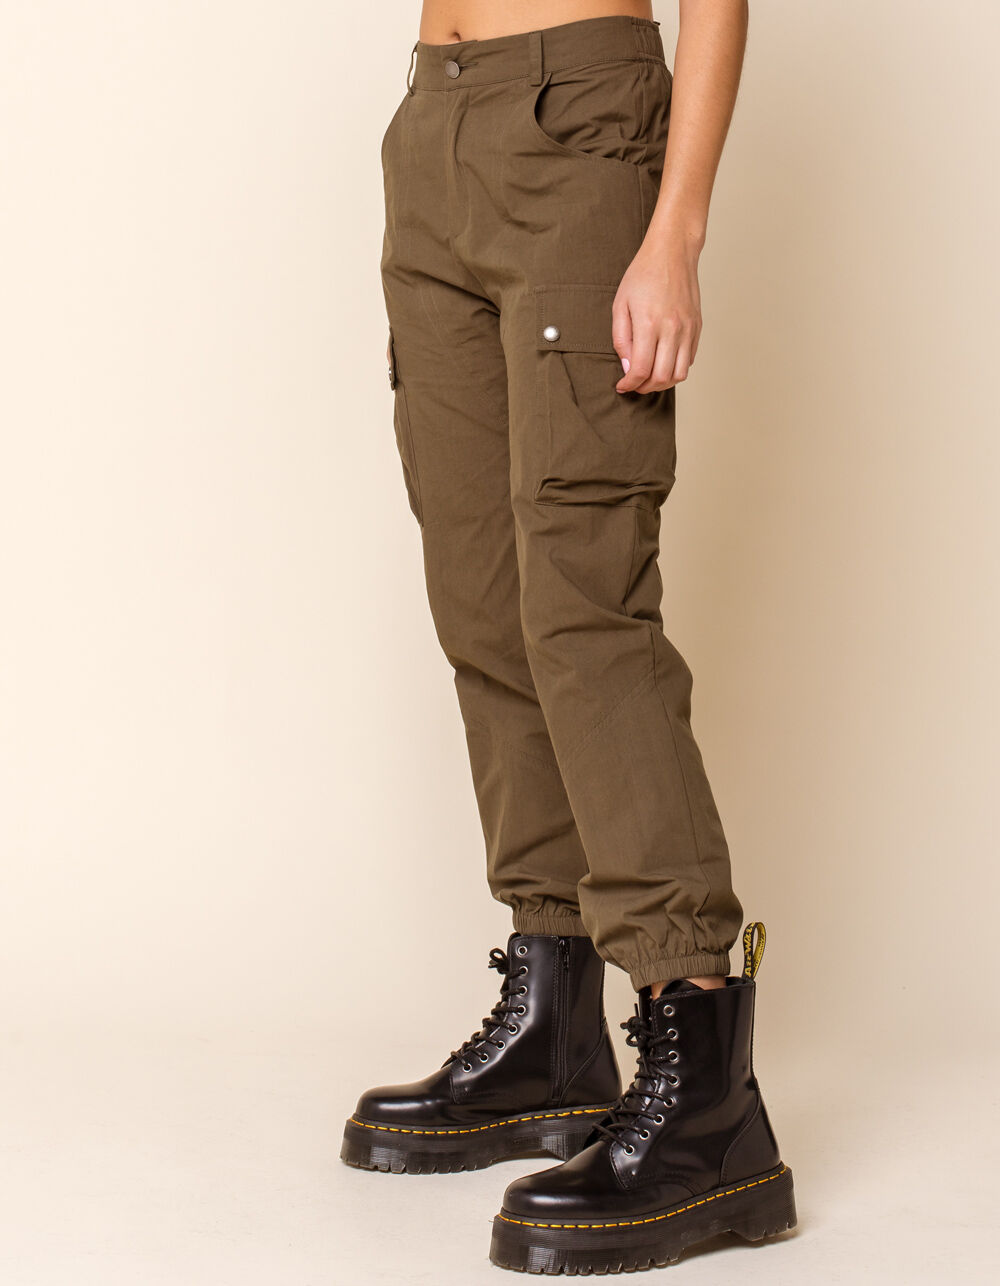 WEST OF MELROSE Roger That Womens Cargo Jogger Pants